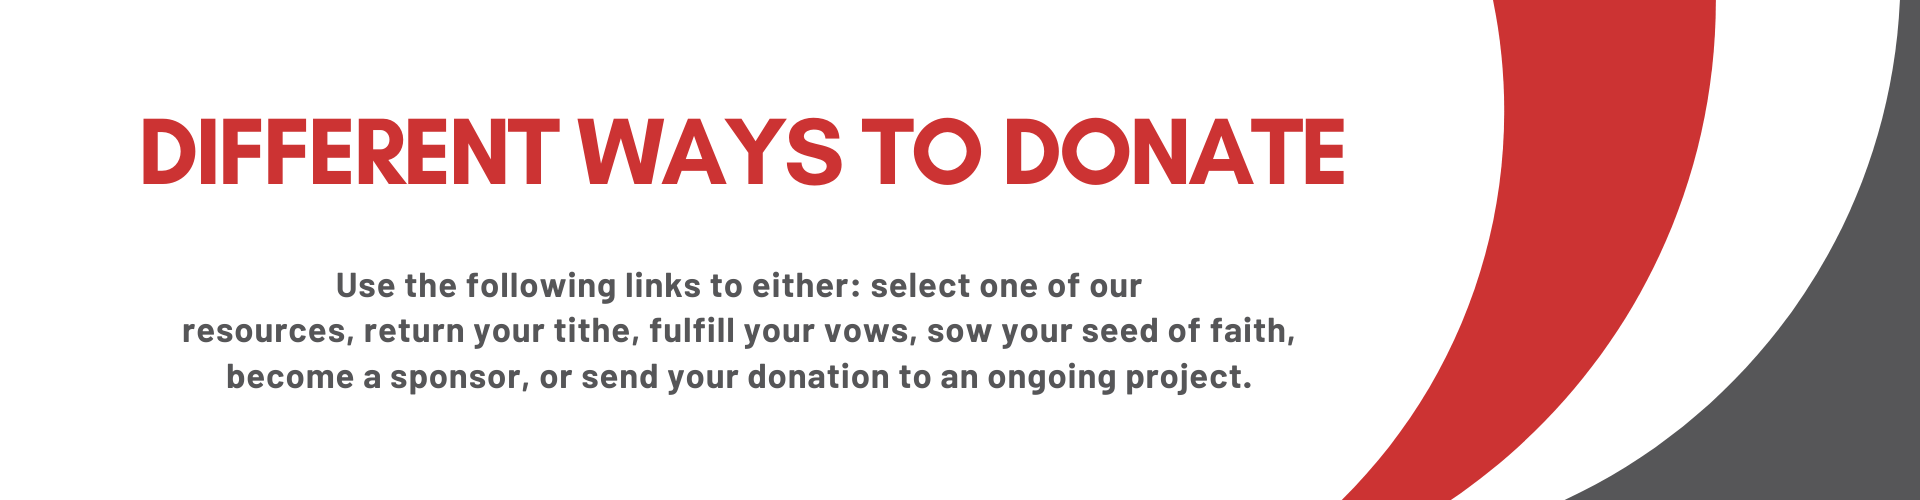 Use the following links to either: select one of our resources, return your tithe, fulfill your vows, sow your seed of faith, become a sponsor, or send your donation to an ongoing project.